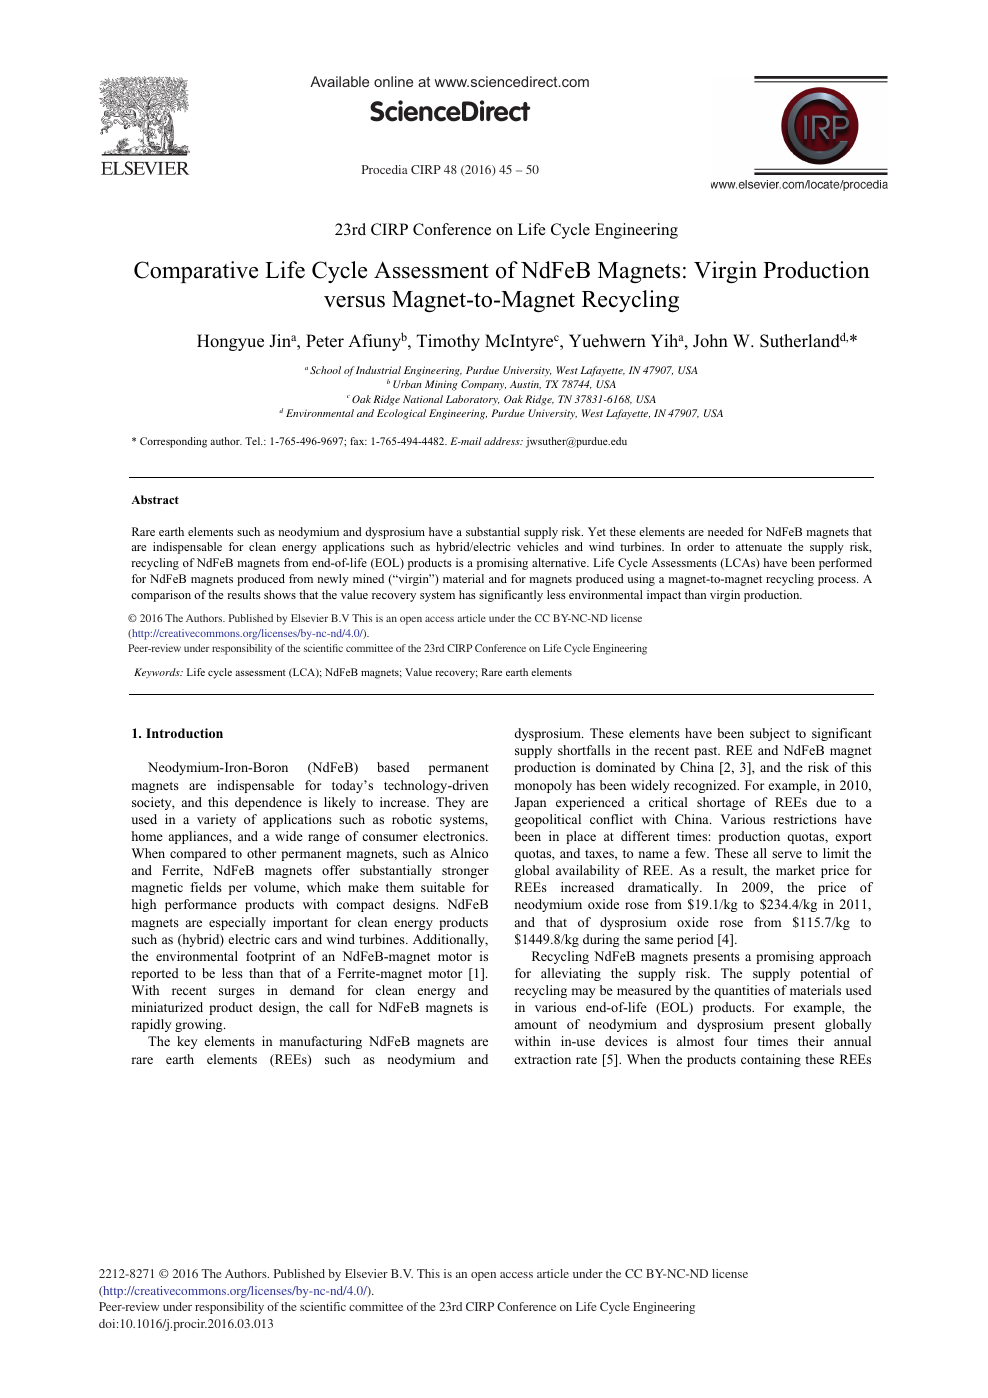 Comparative Life Cycle Assessment Of Ndfeb Magnets Virgin Production Versus Magnet To Magnet Recycling Topic Of Research Paper In Materials Engineering Download Scholarly Article Pdf And Read For Free On Cyberleninka Open Science